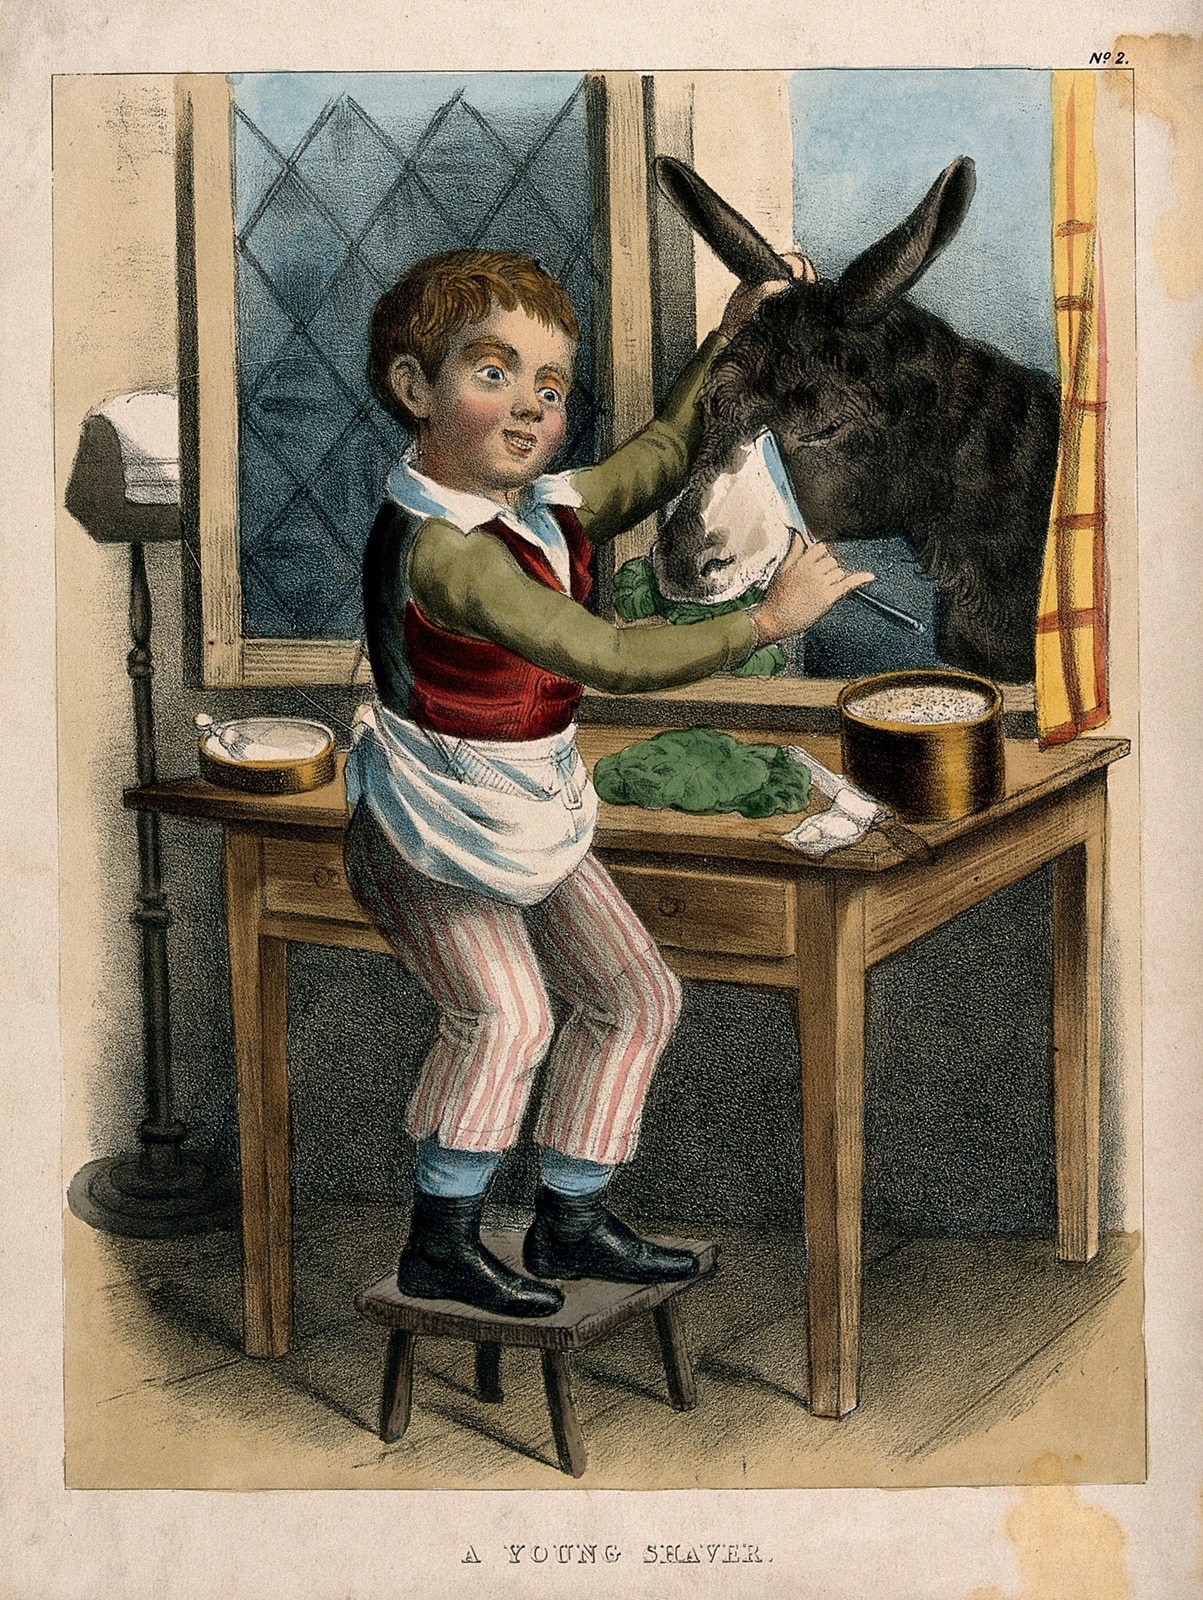 In this colour illustration a young boy standing on a stool shaves the face of a donkey, which is poking its head through an open window.